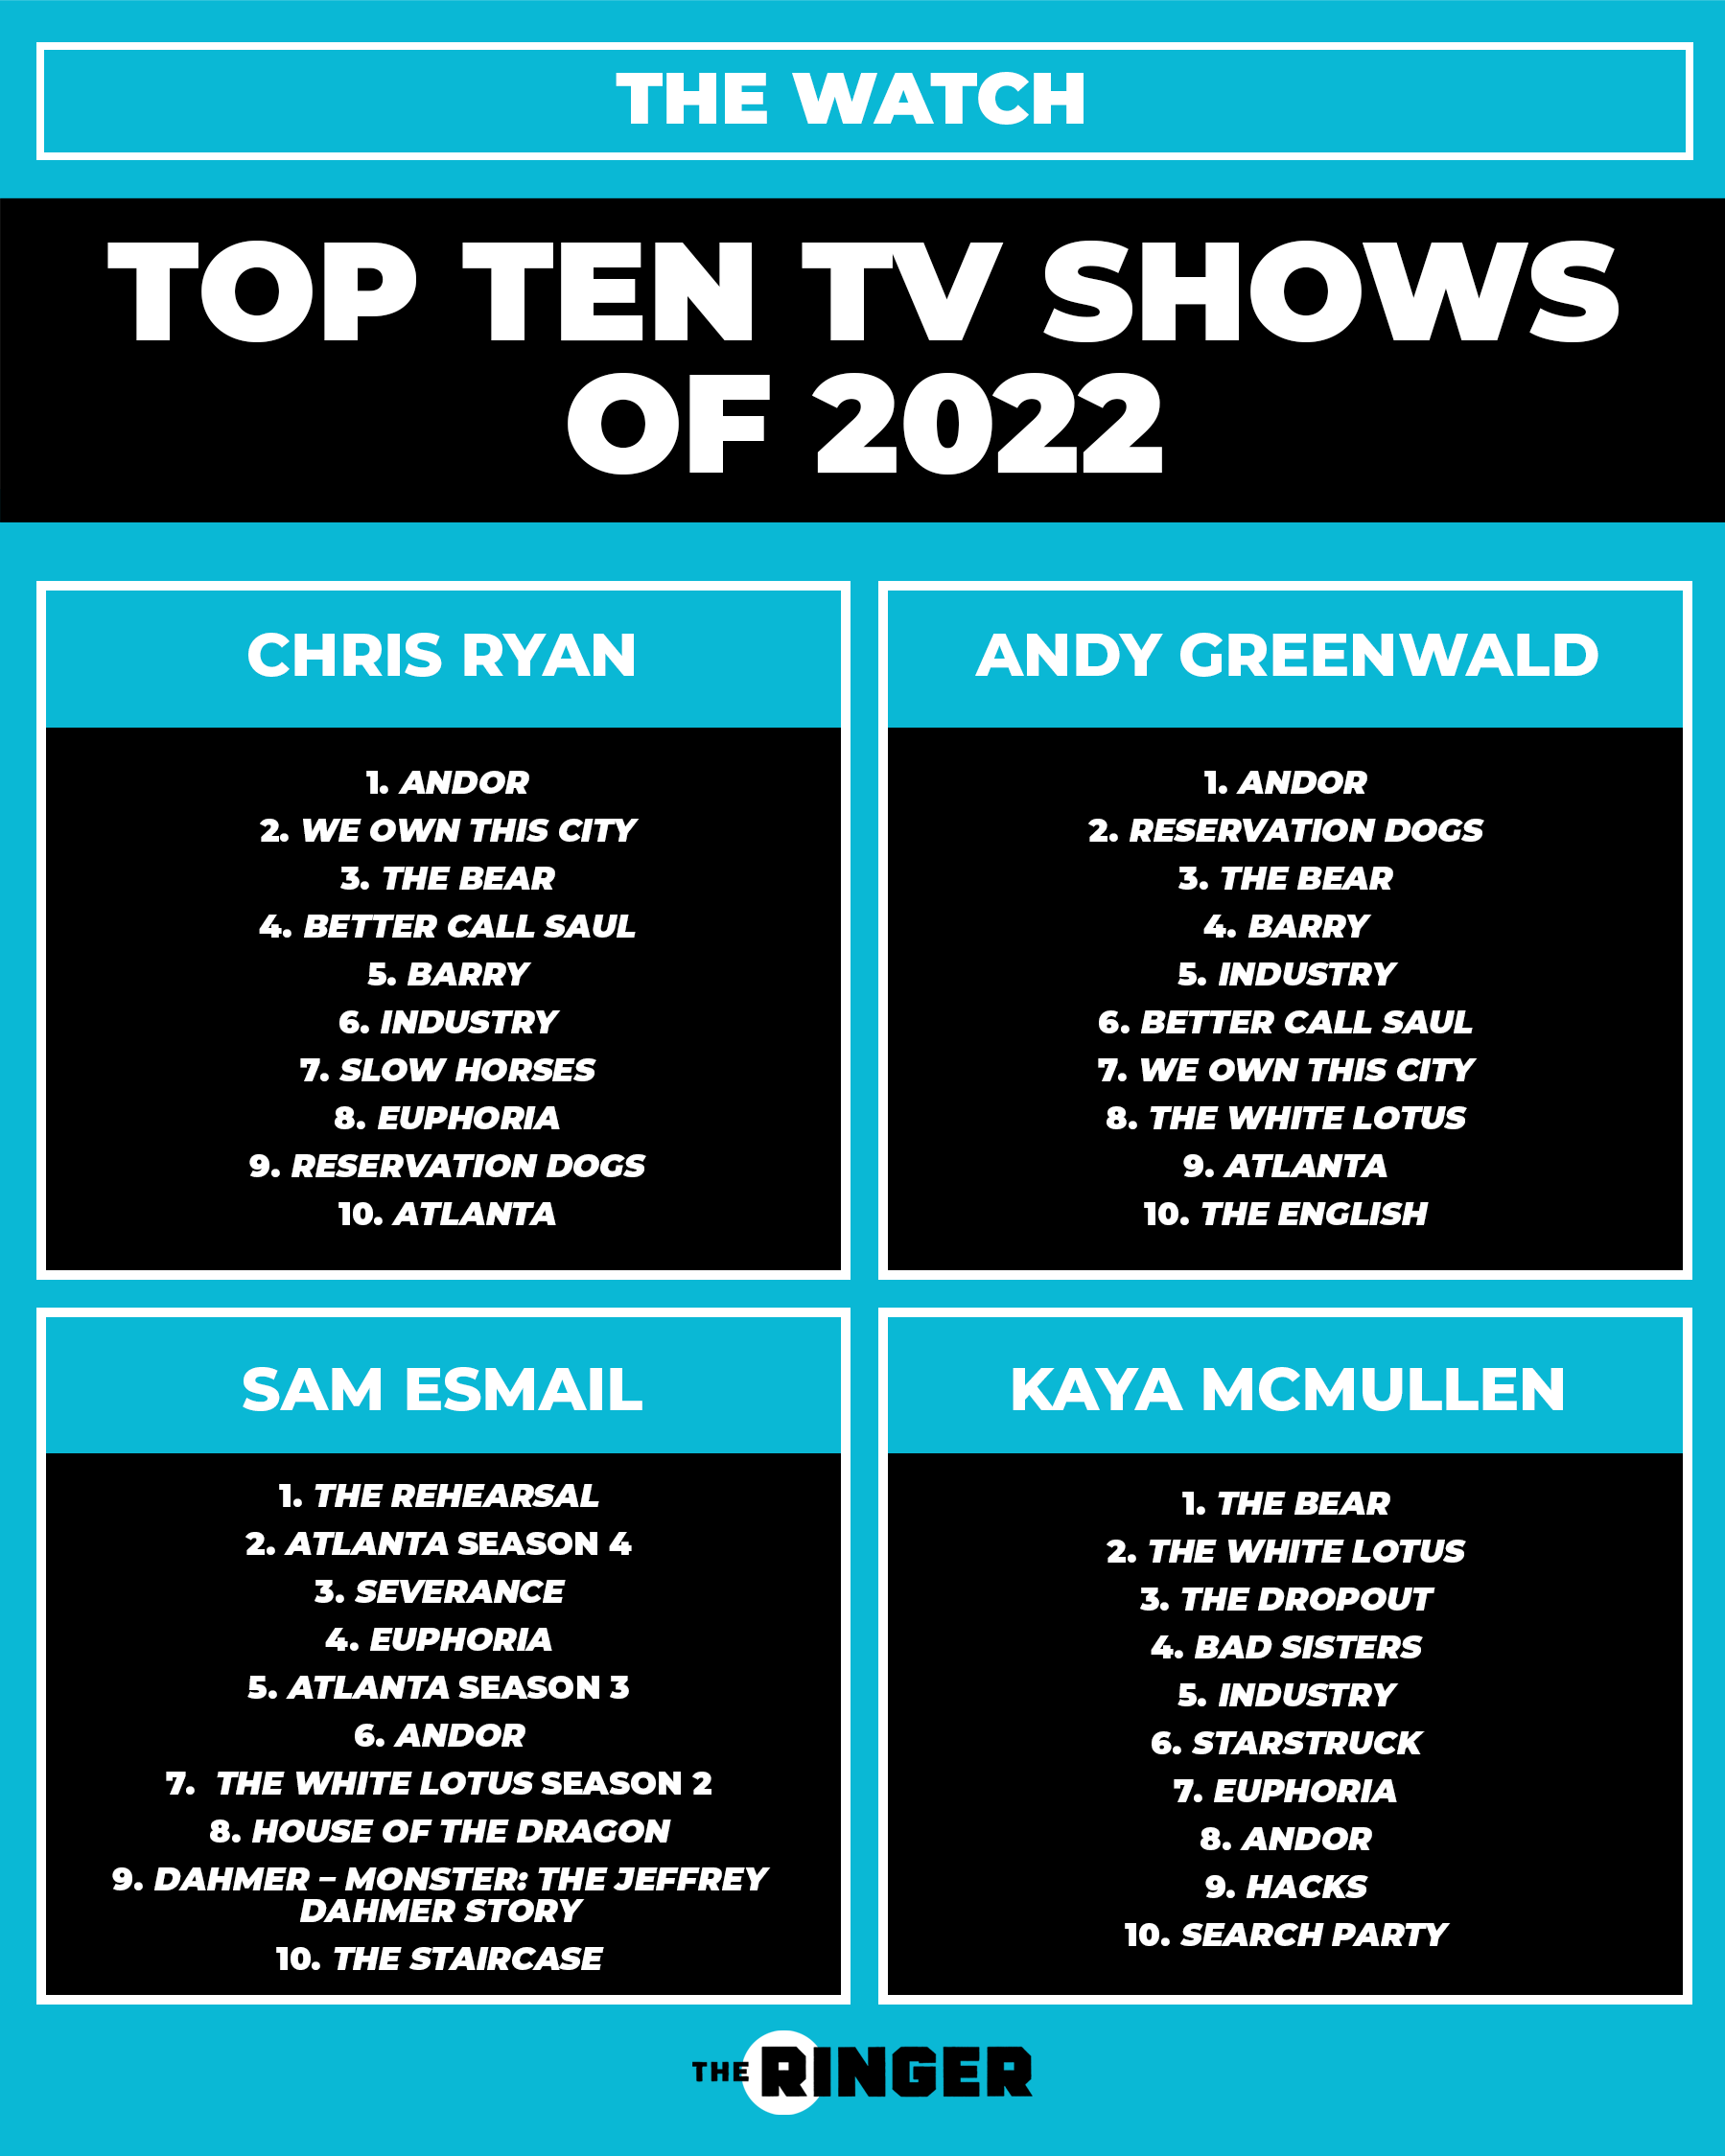 The Watch on Twitter: case you Baranskis prefer to see our top TV shows of 2022 in list form, here is: https://t.co/ItmiofX6R5" / Twitter